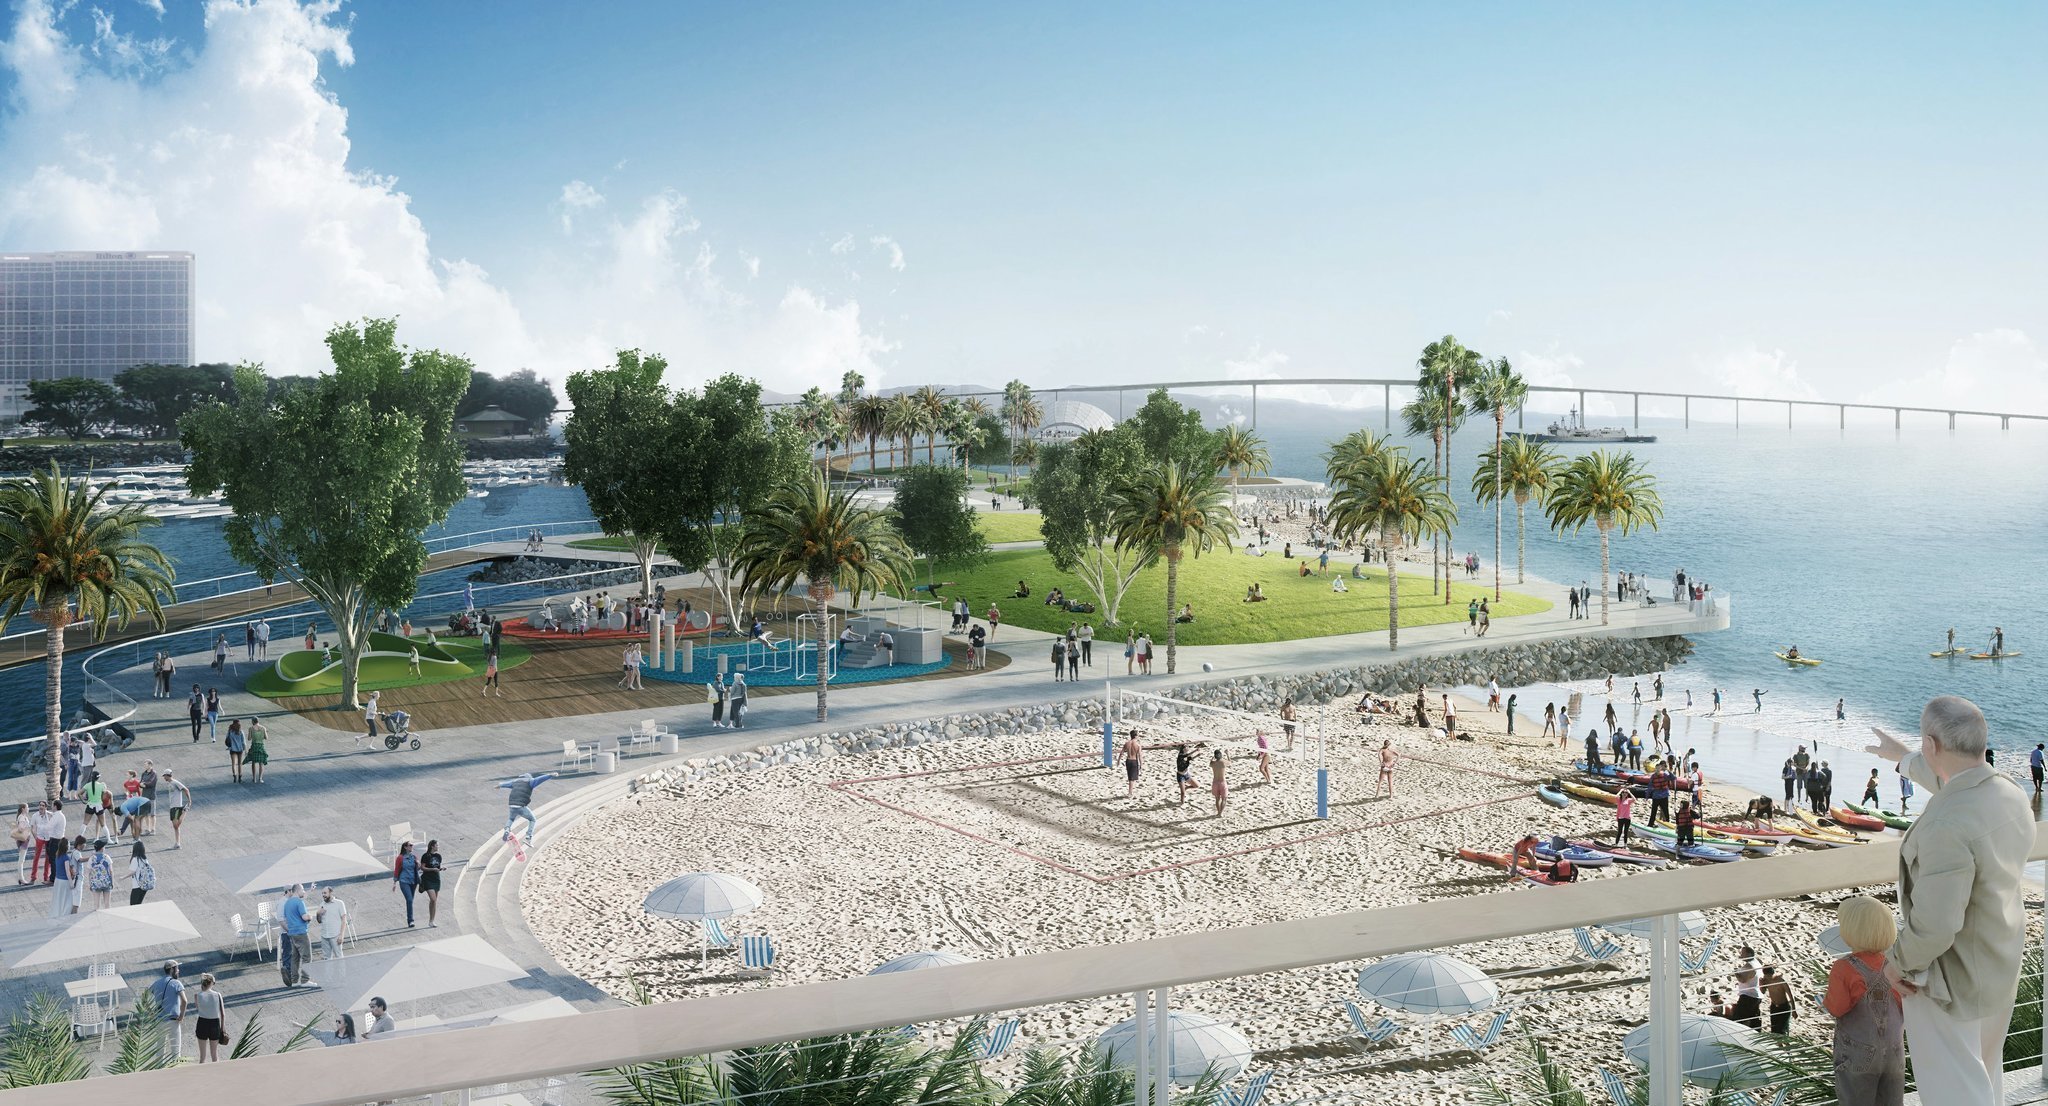 BIG Proposals For Downtown San Diego's Seaport Village